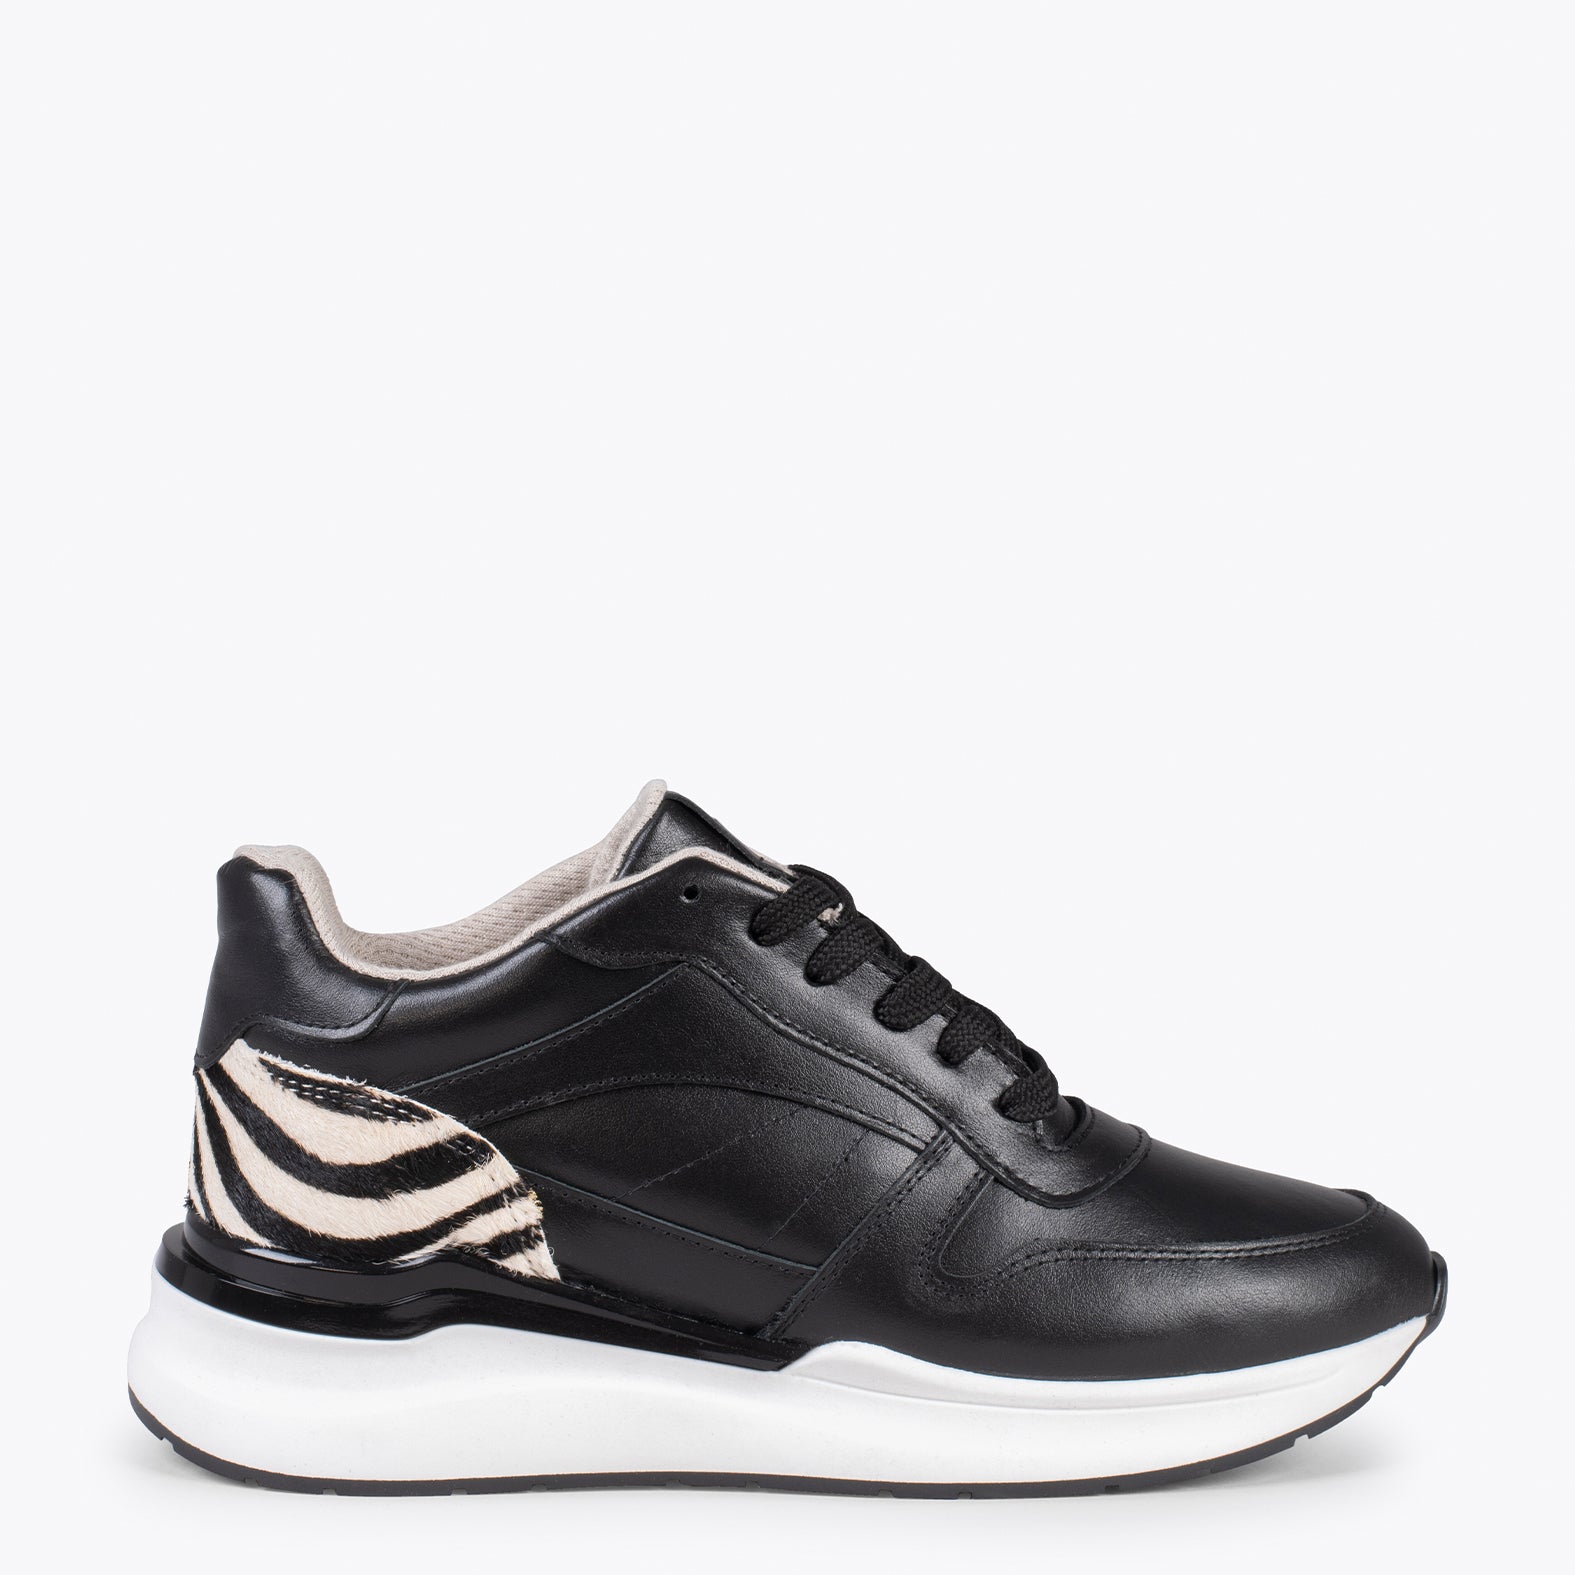 FREEDOM – BLACK & ZEBRA sneakers with removable insole